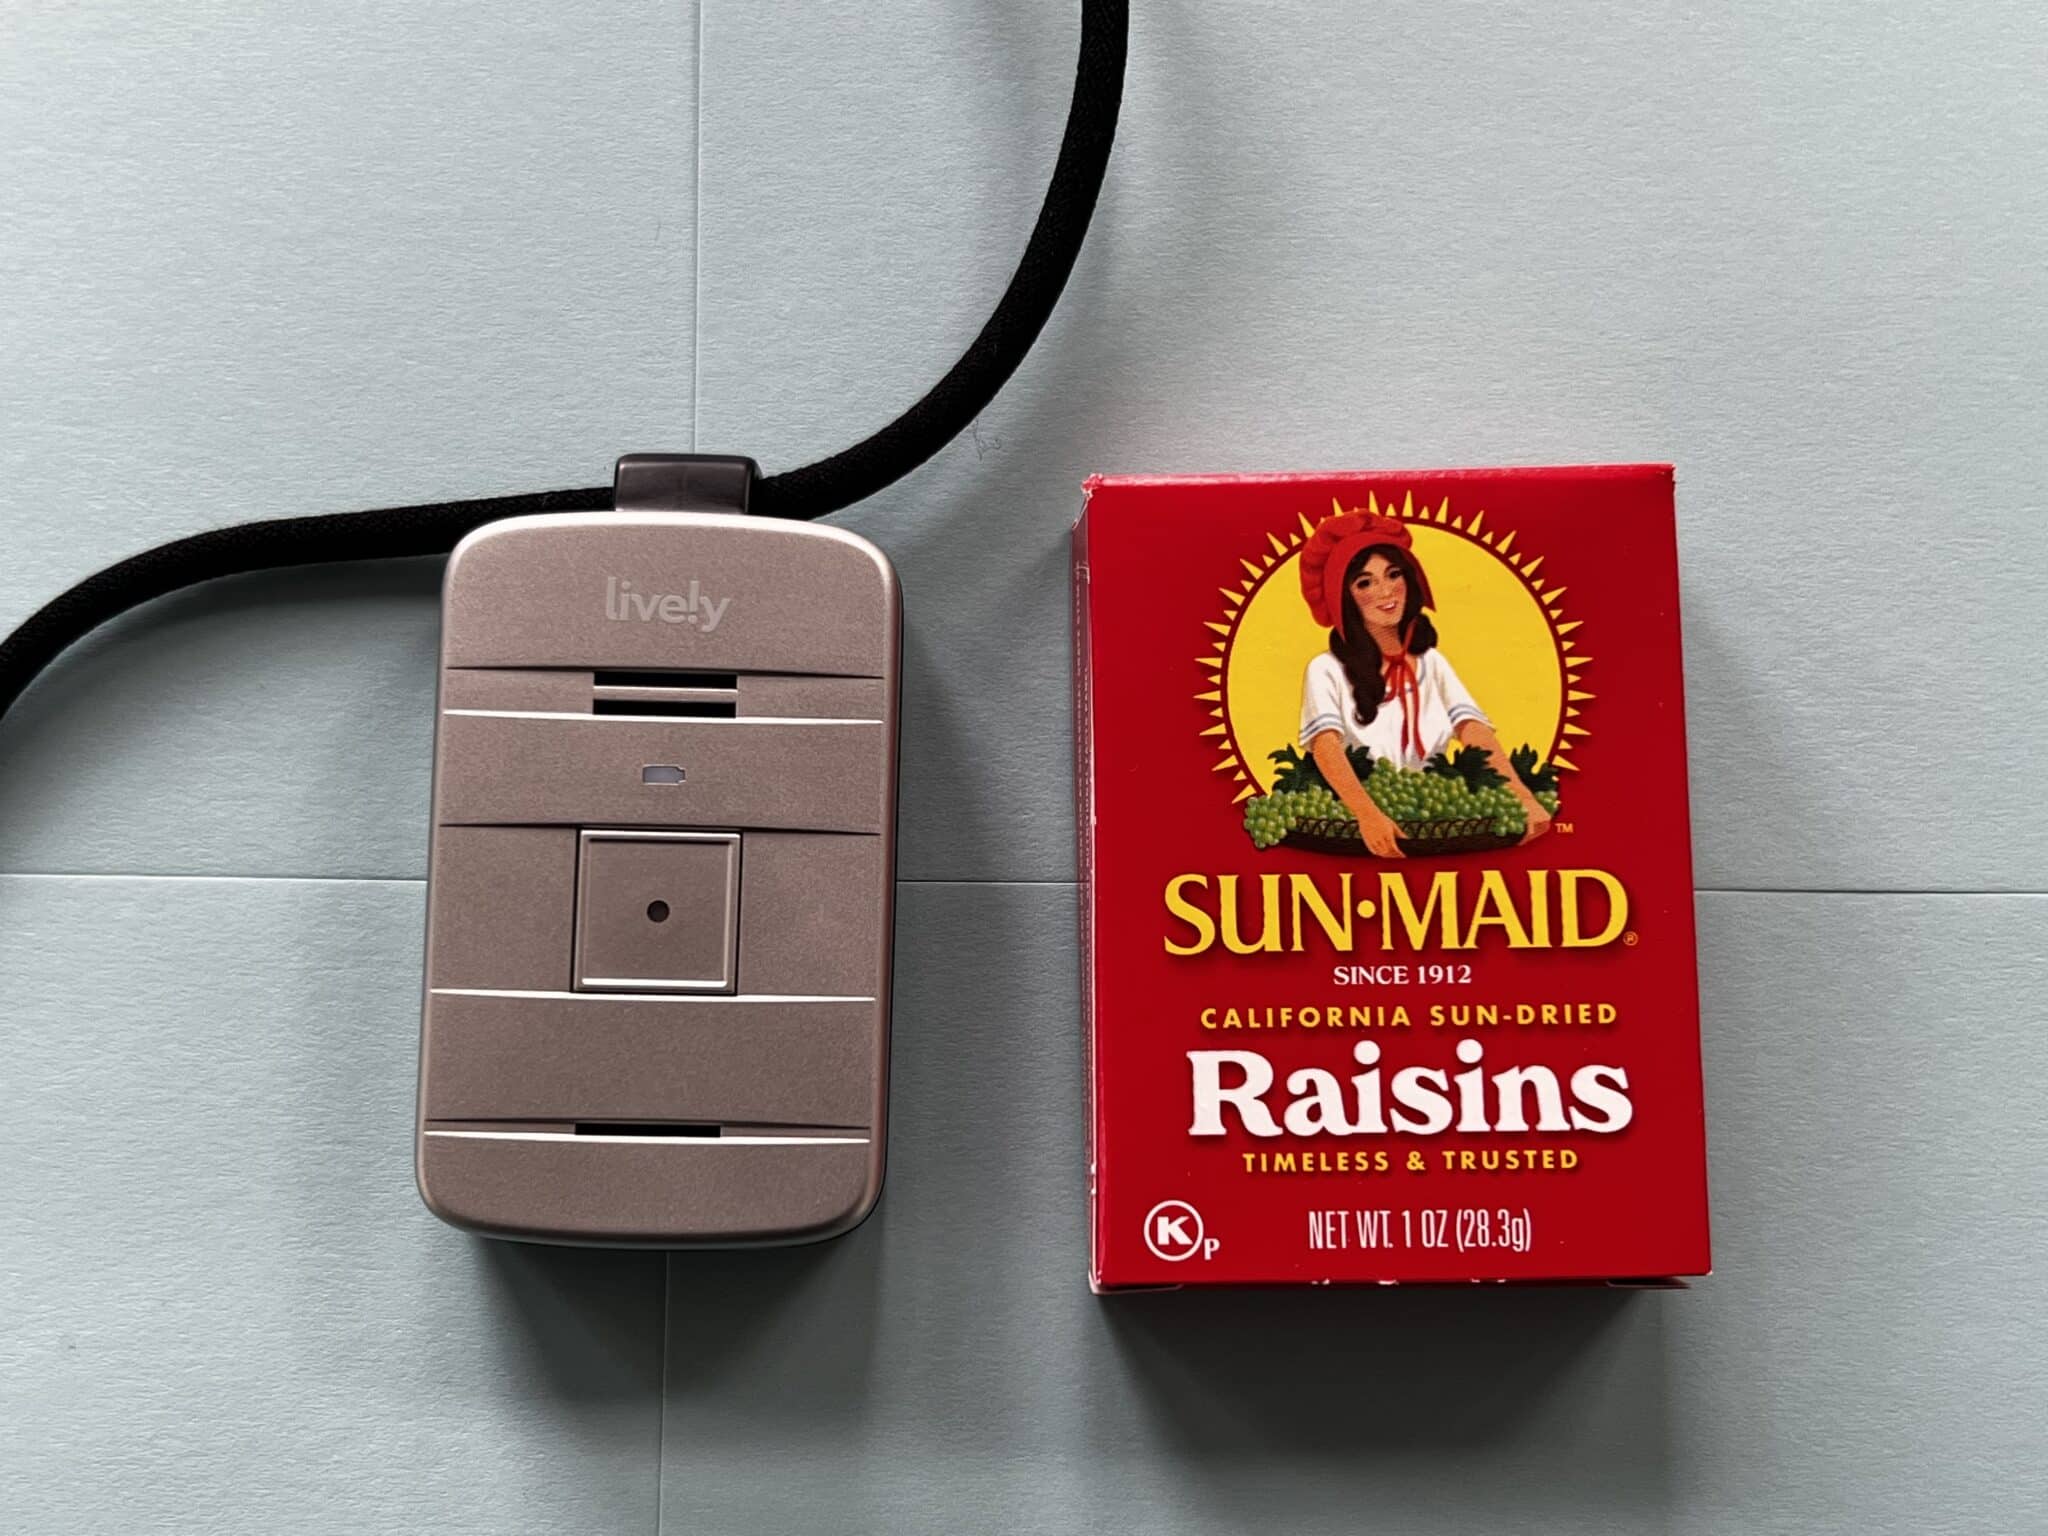 Lively Mobile Plus medical alert system size compared to box of raisins on a blue background